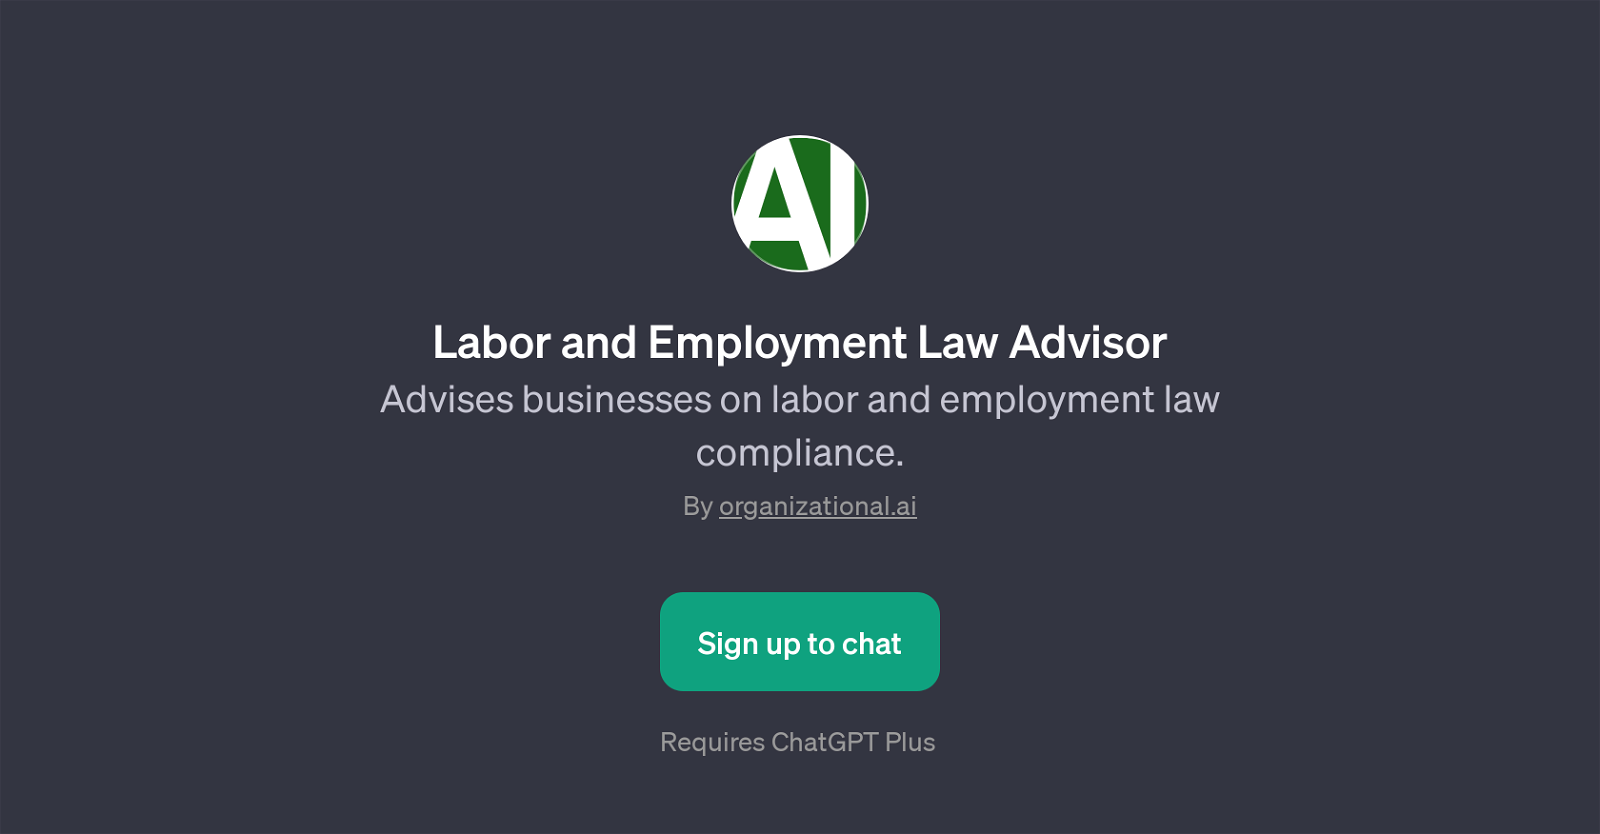 Labor and Employment Law Advisor website